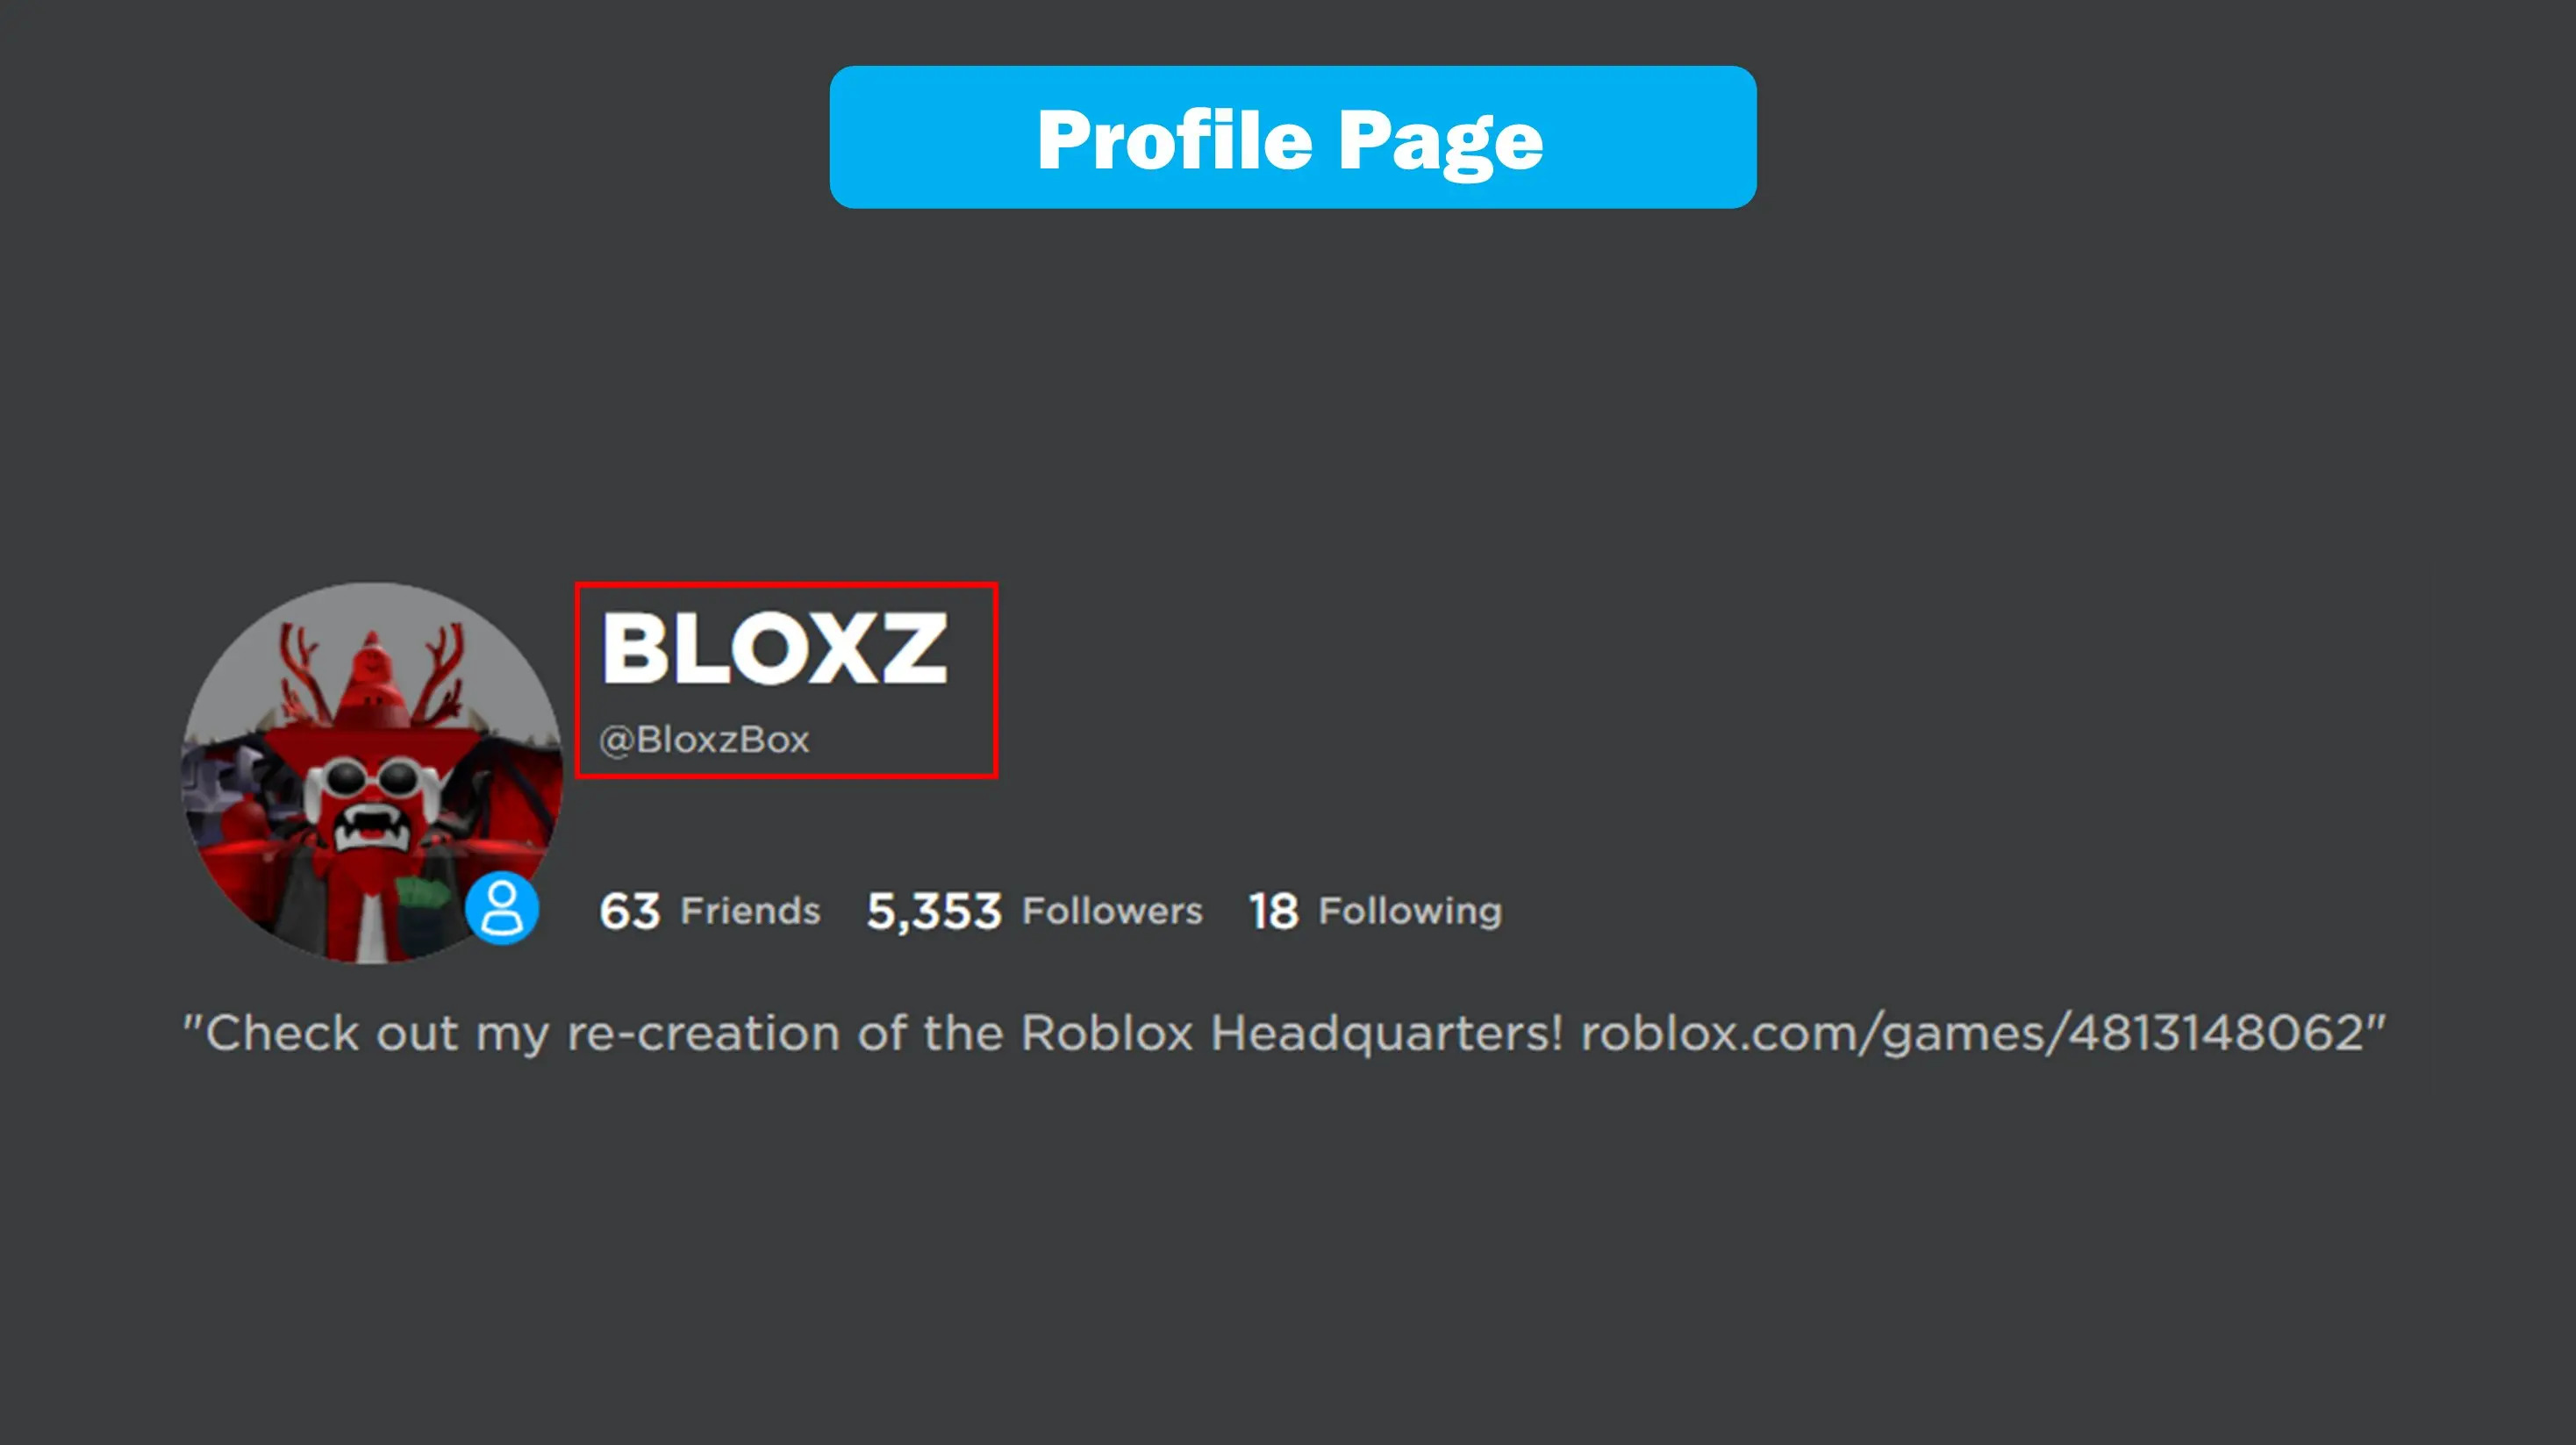 How To Change Your Display Name In Roblox